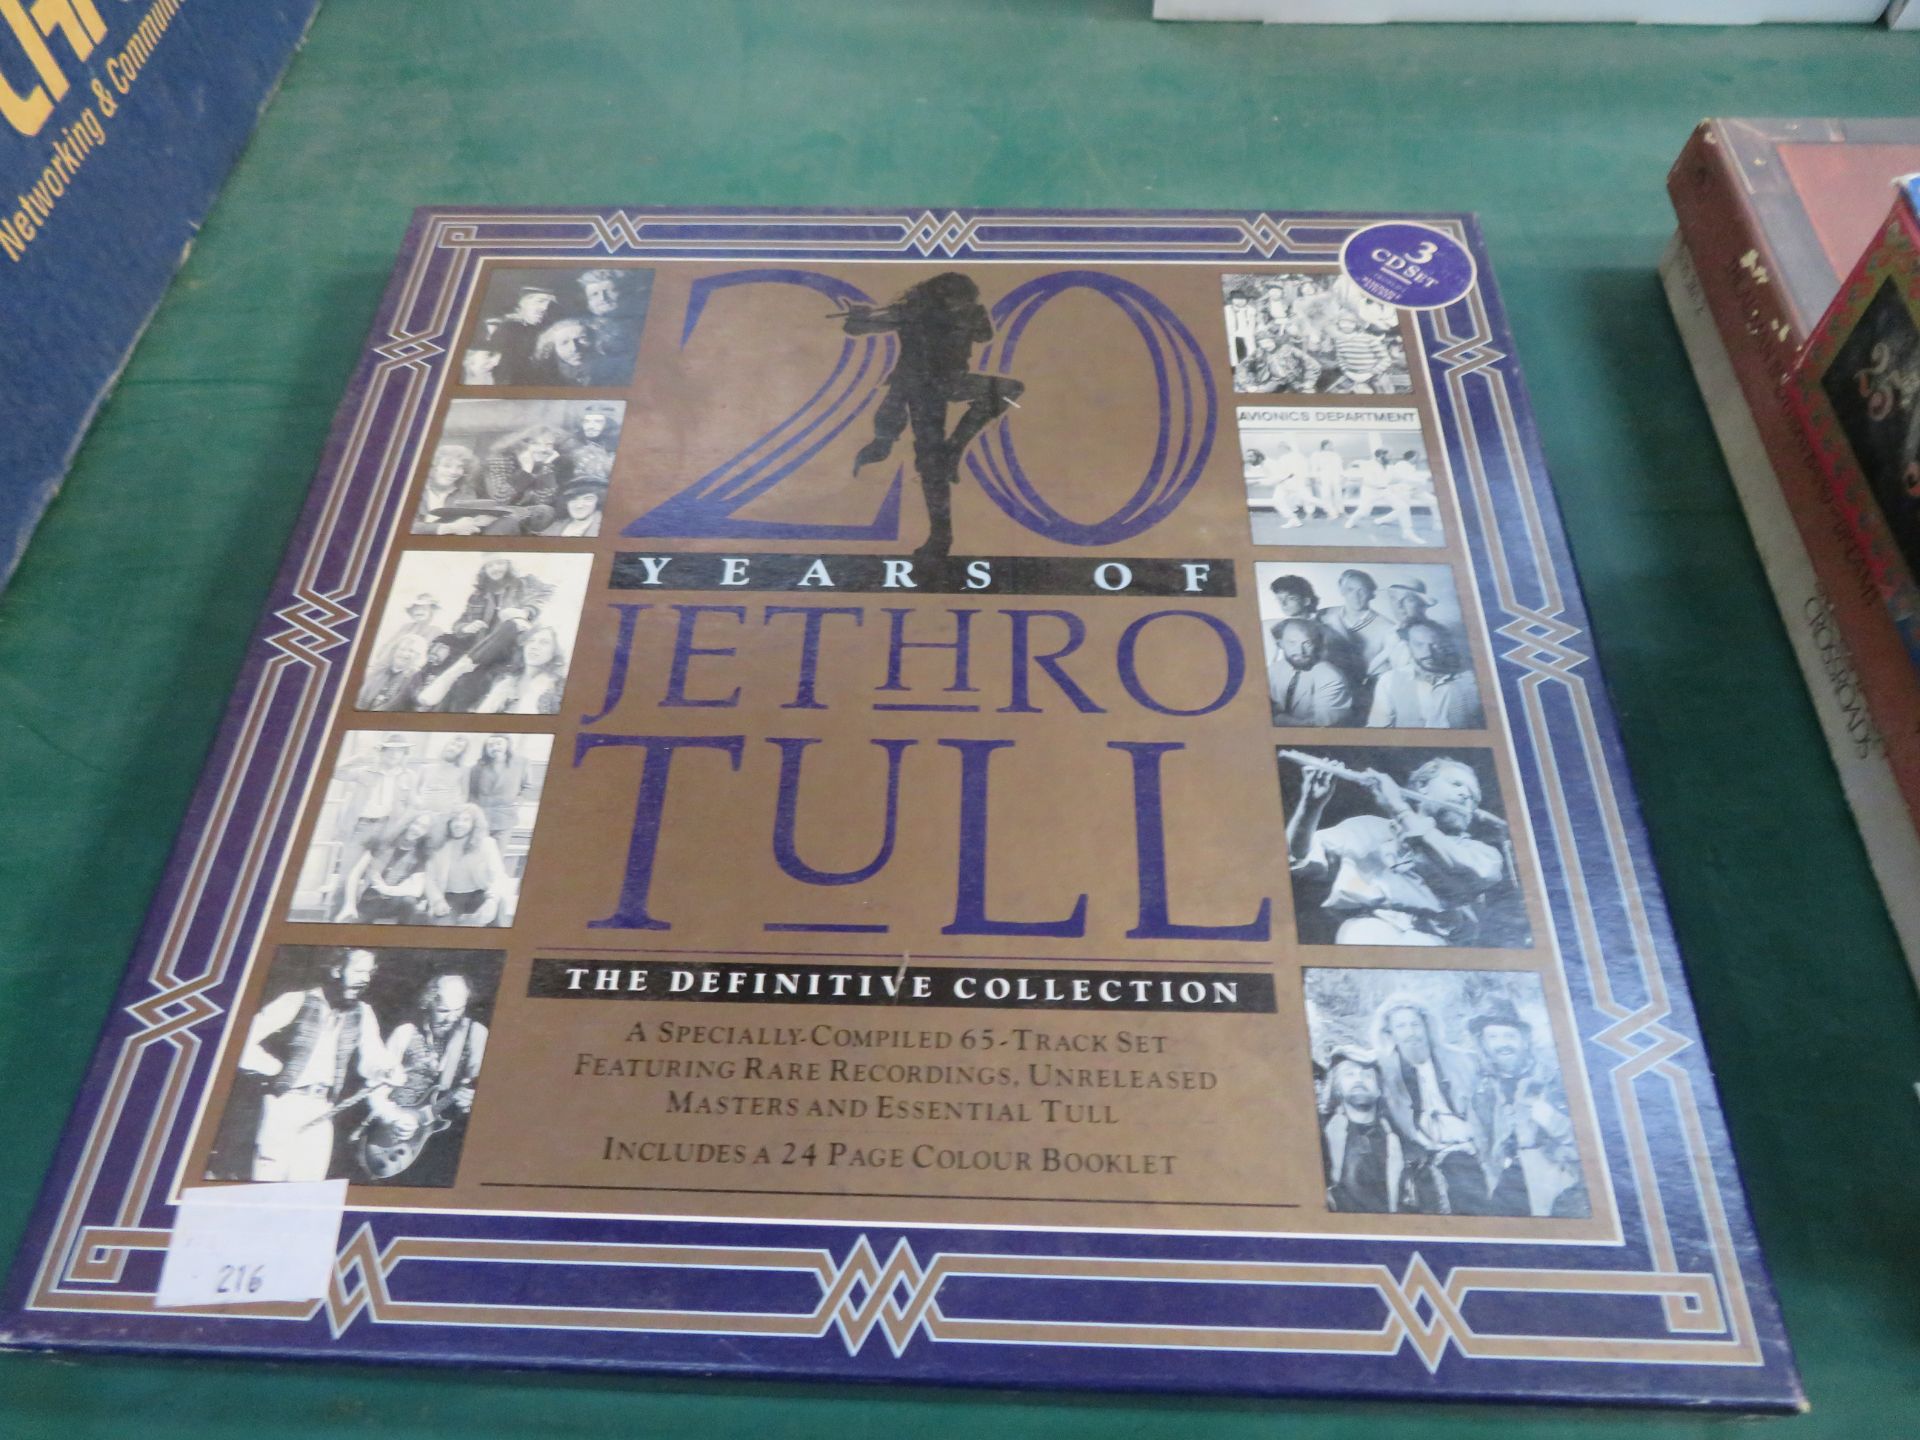 A Collection of Six Boxed CD Sets by Jethro Tull - Image 3 of 6